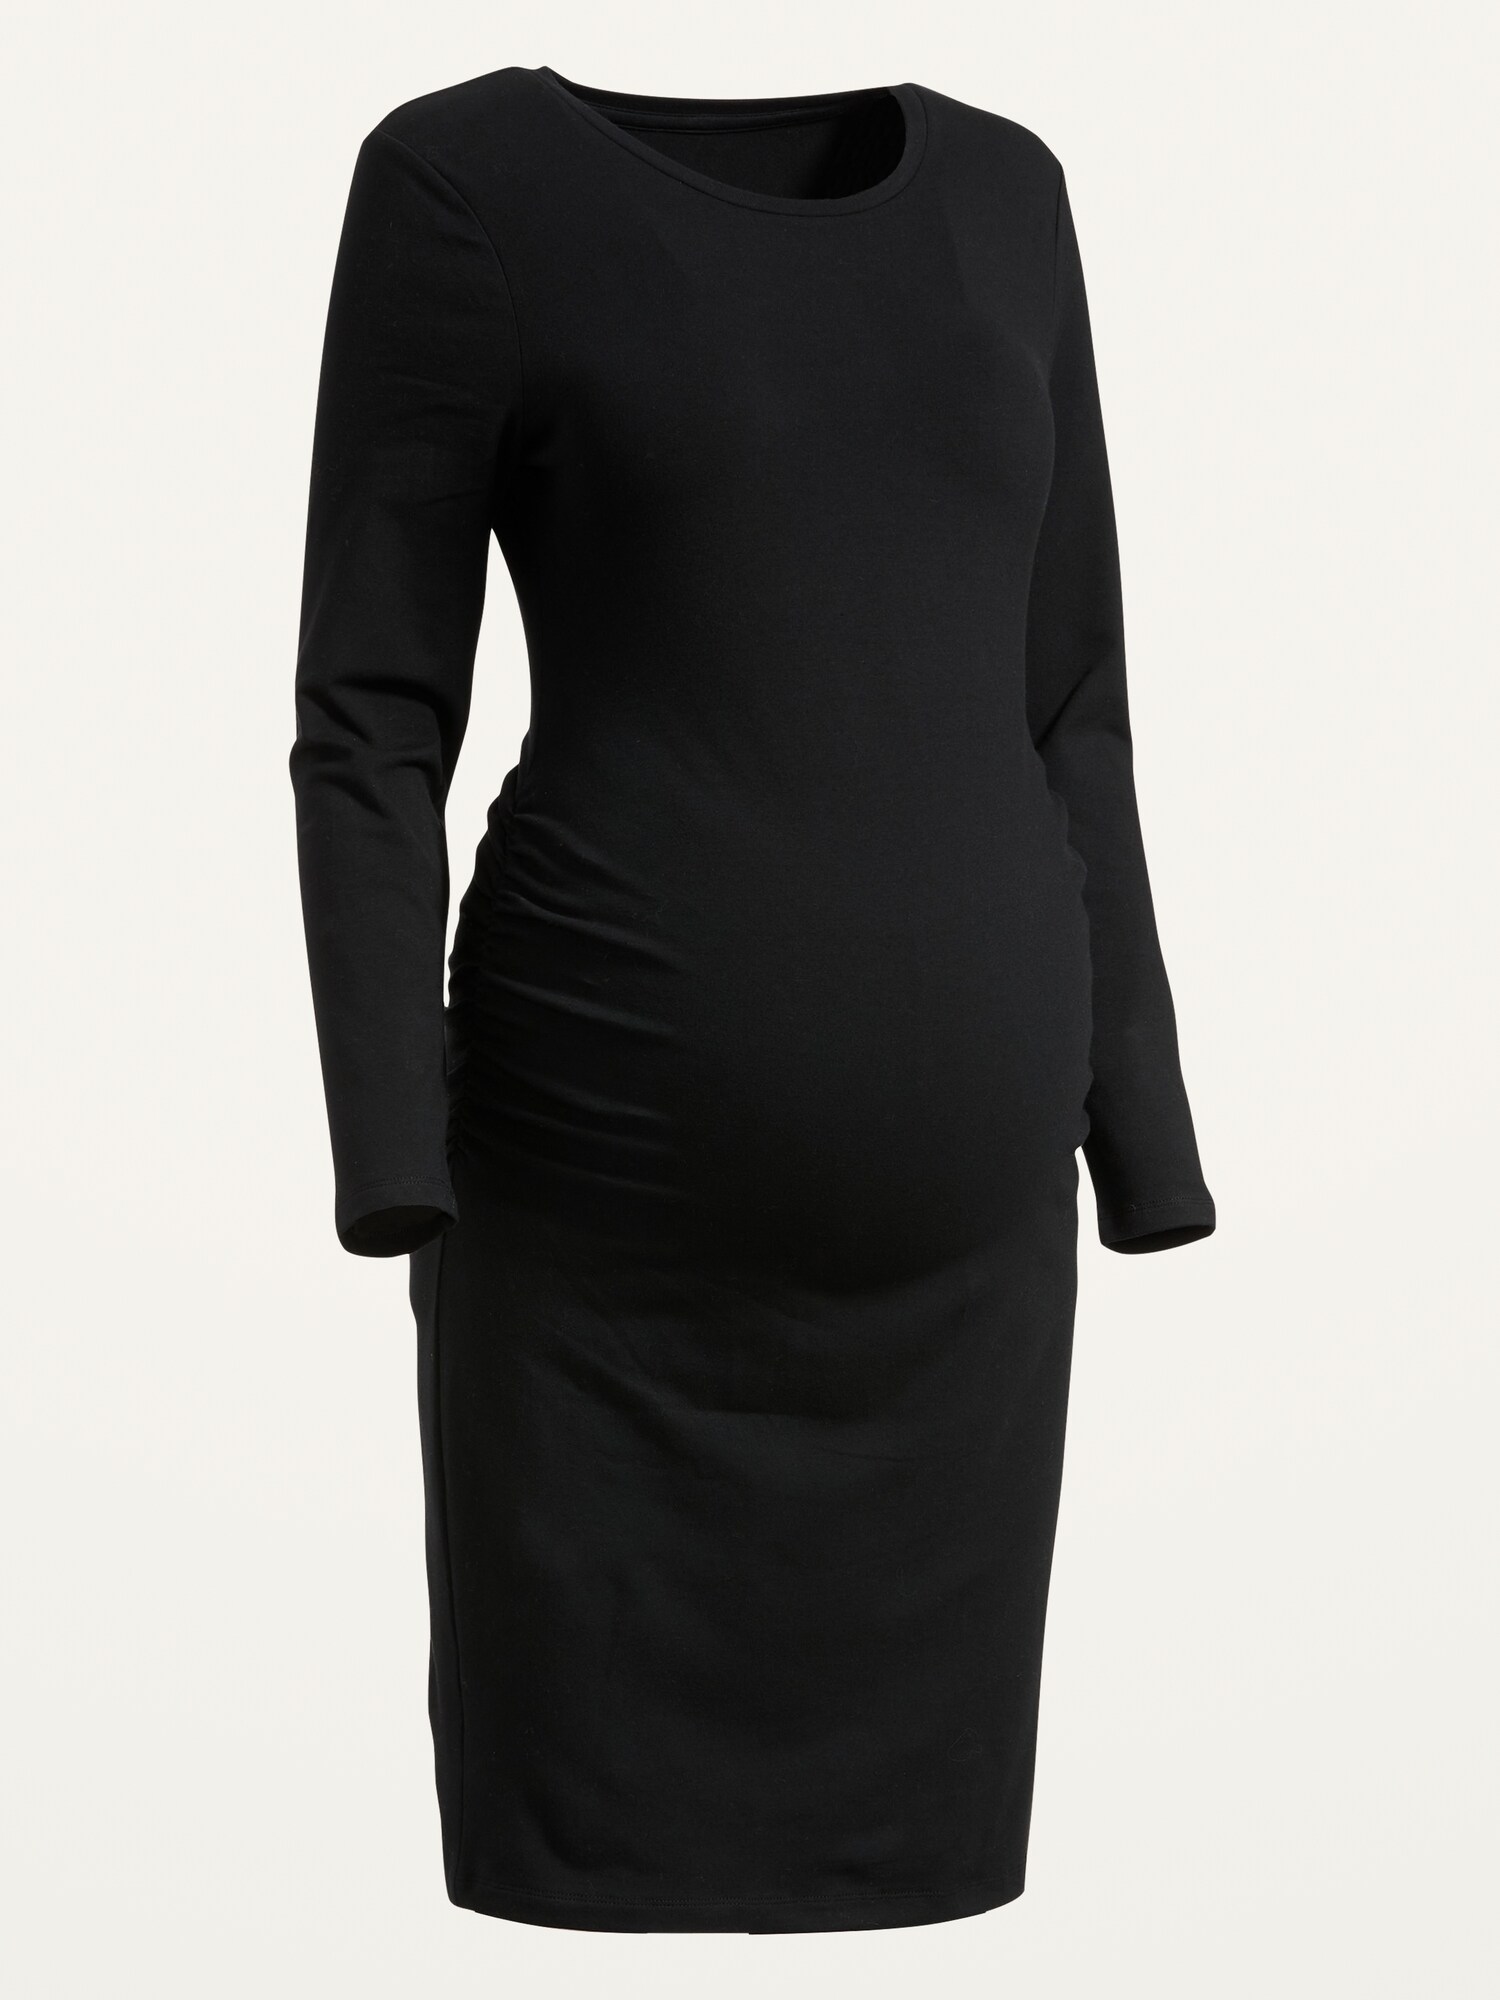 Long Sleeve Rushed Bodycon Maternity Dress - Isabel Maternity by